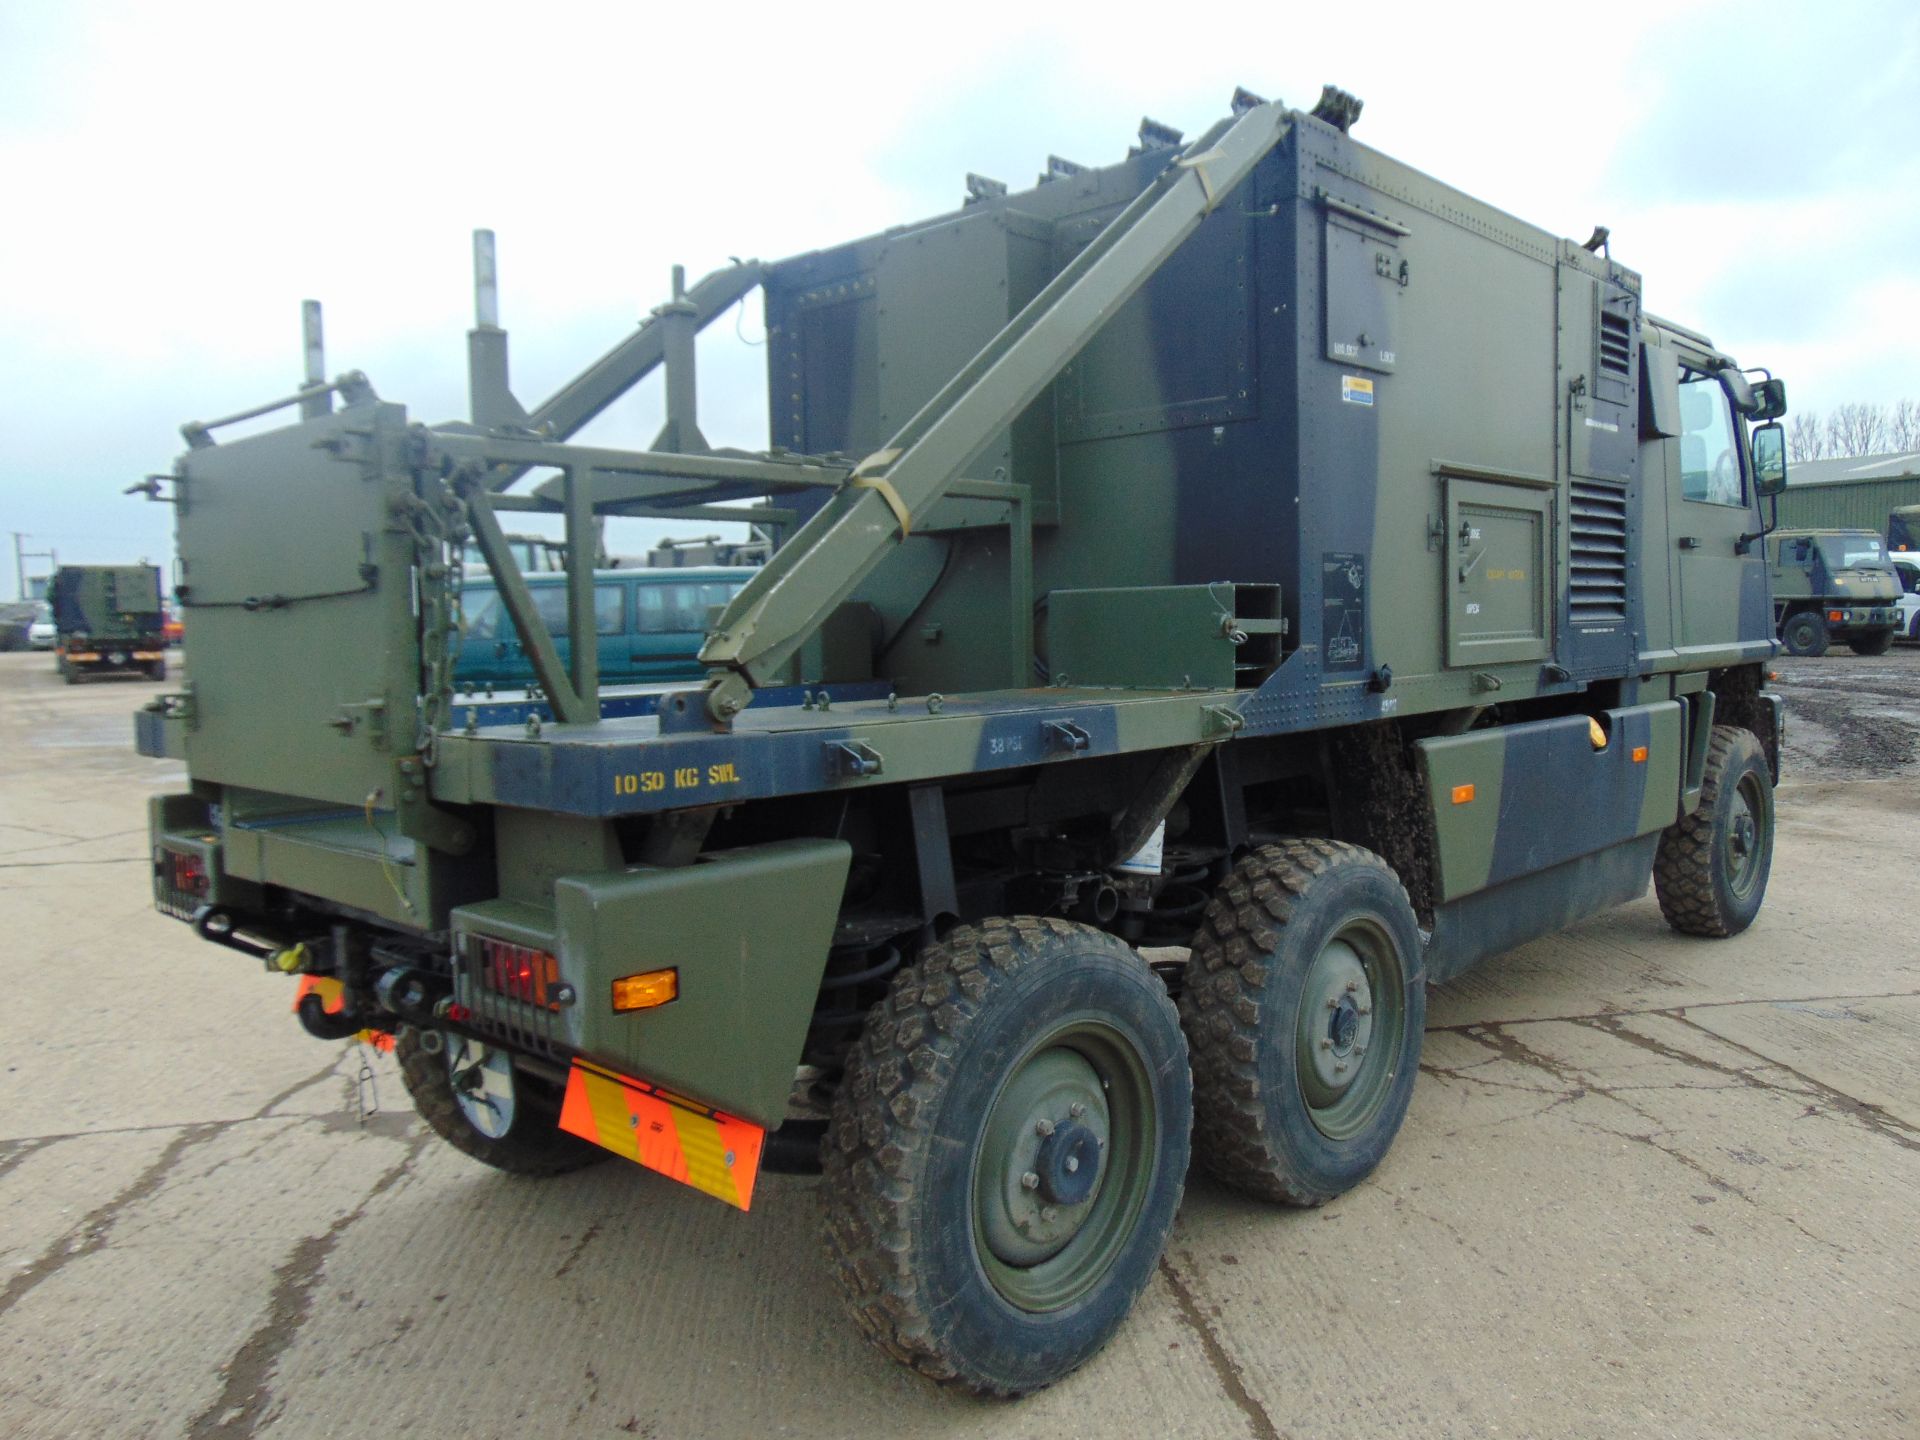 Ex Reserve Left Hand Drive Mowag Bucher Duro II 6x6 High-Mobility Tactical Vehicle - Image 4 of 15